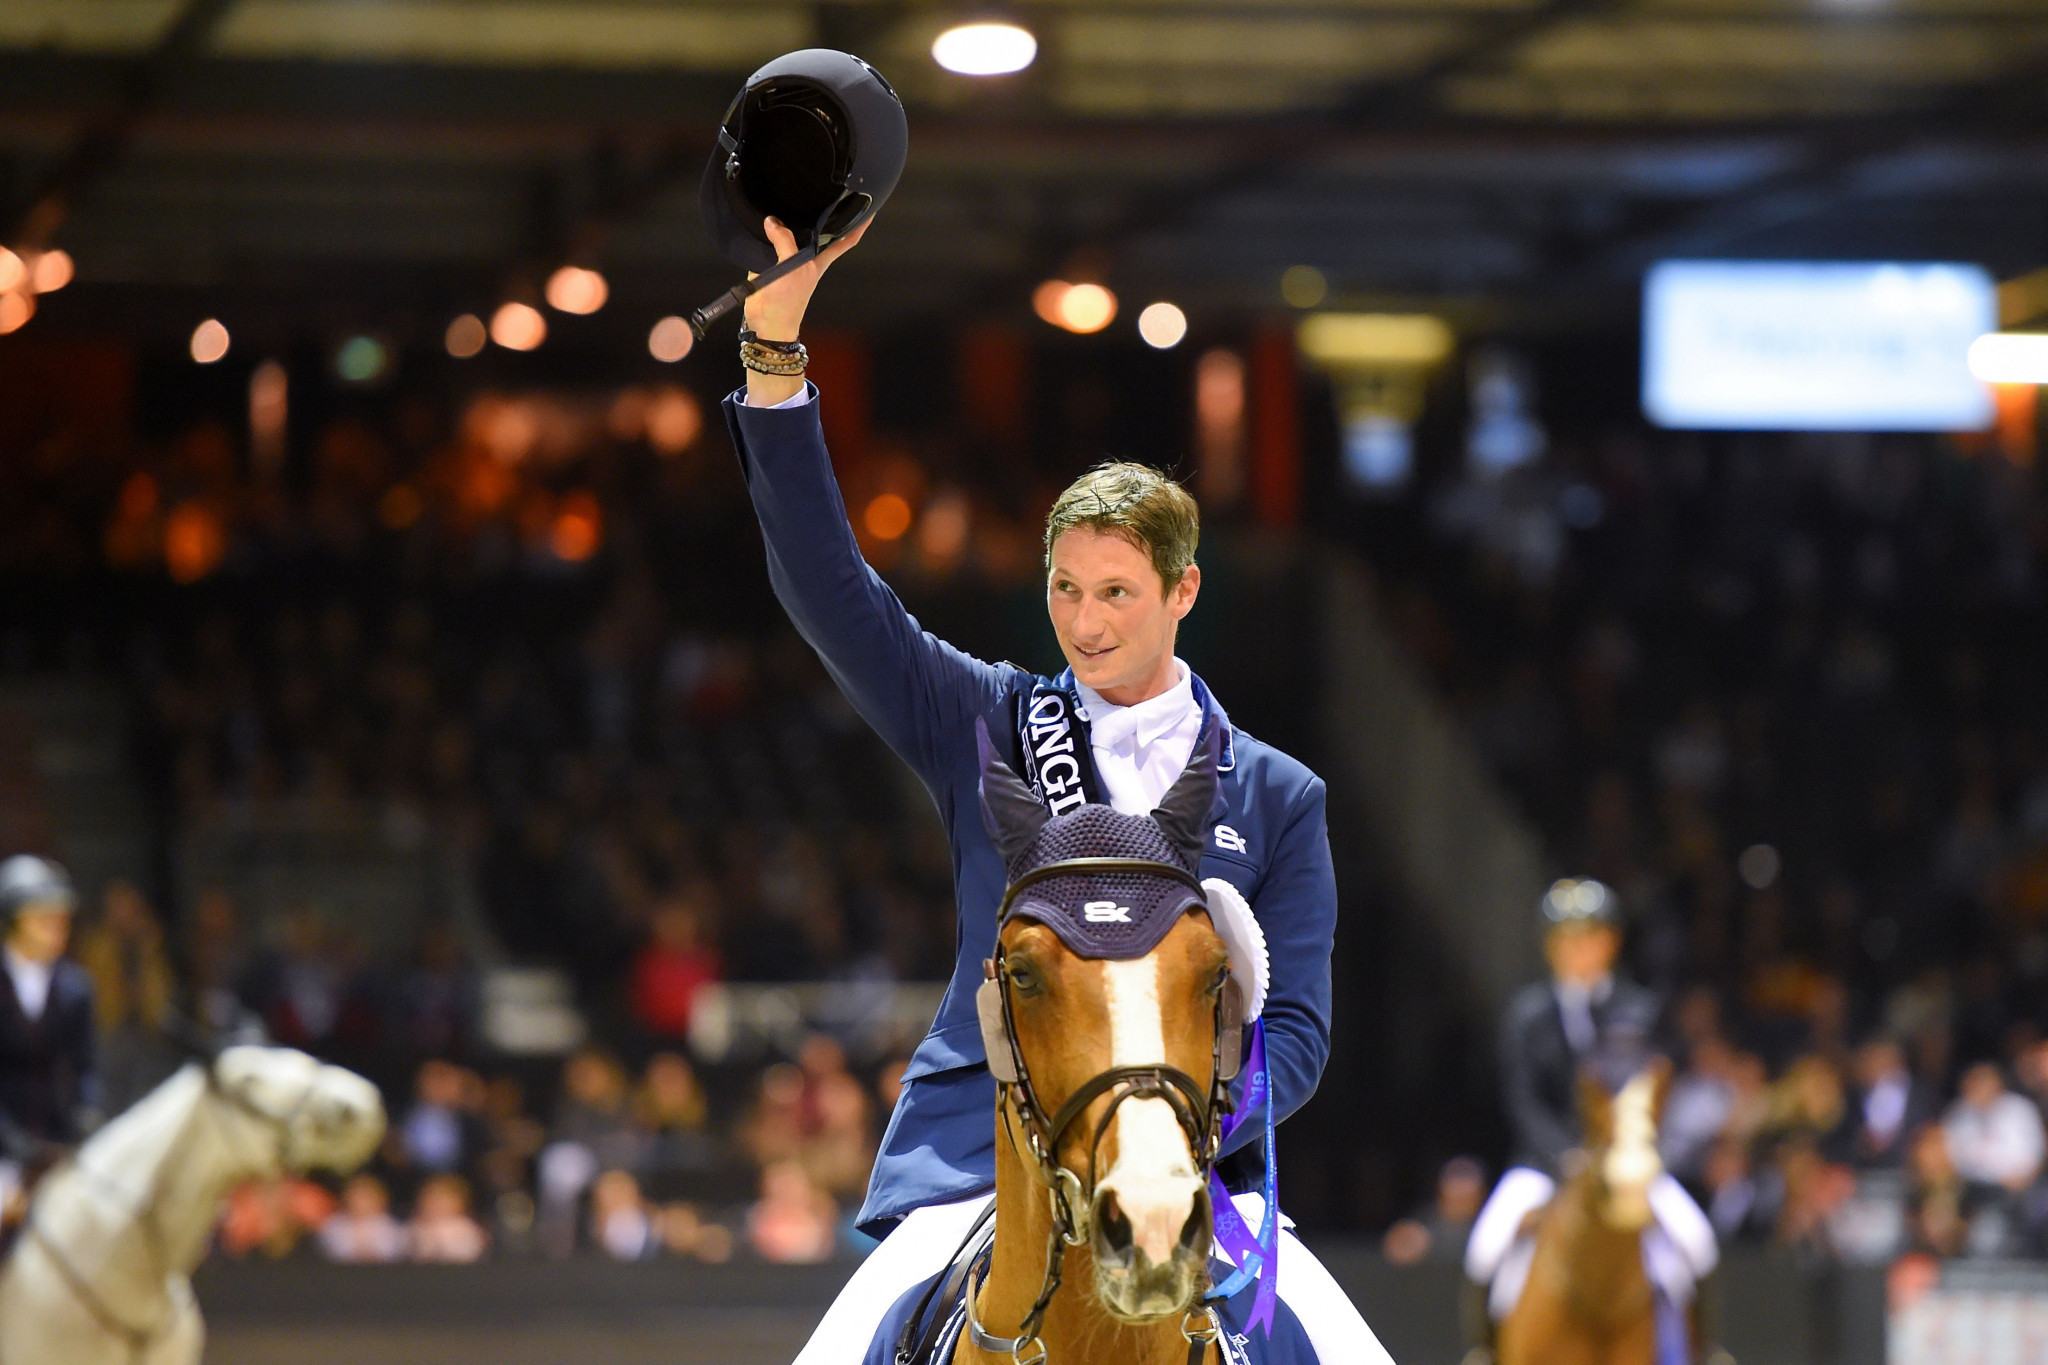 Germany's Daniel Deusser will be a strong contender at the Longines Global Champions Tour event in Cannes ©Getty Images